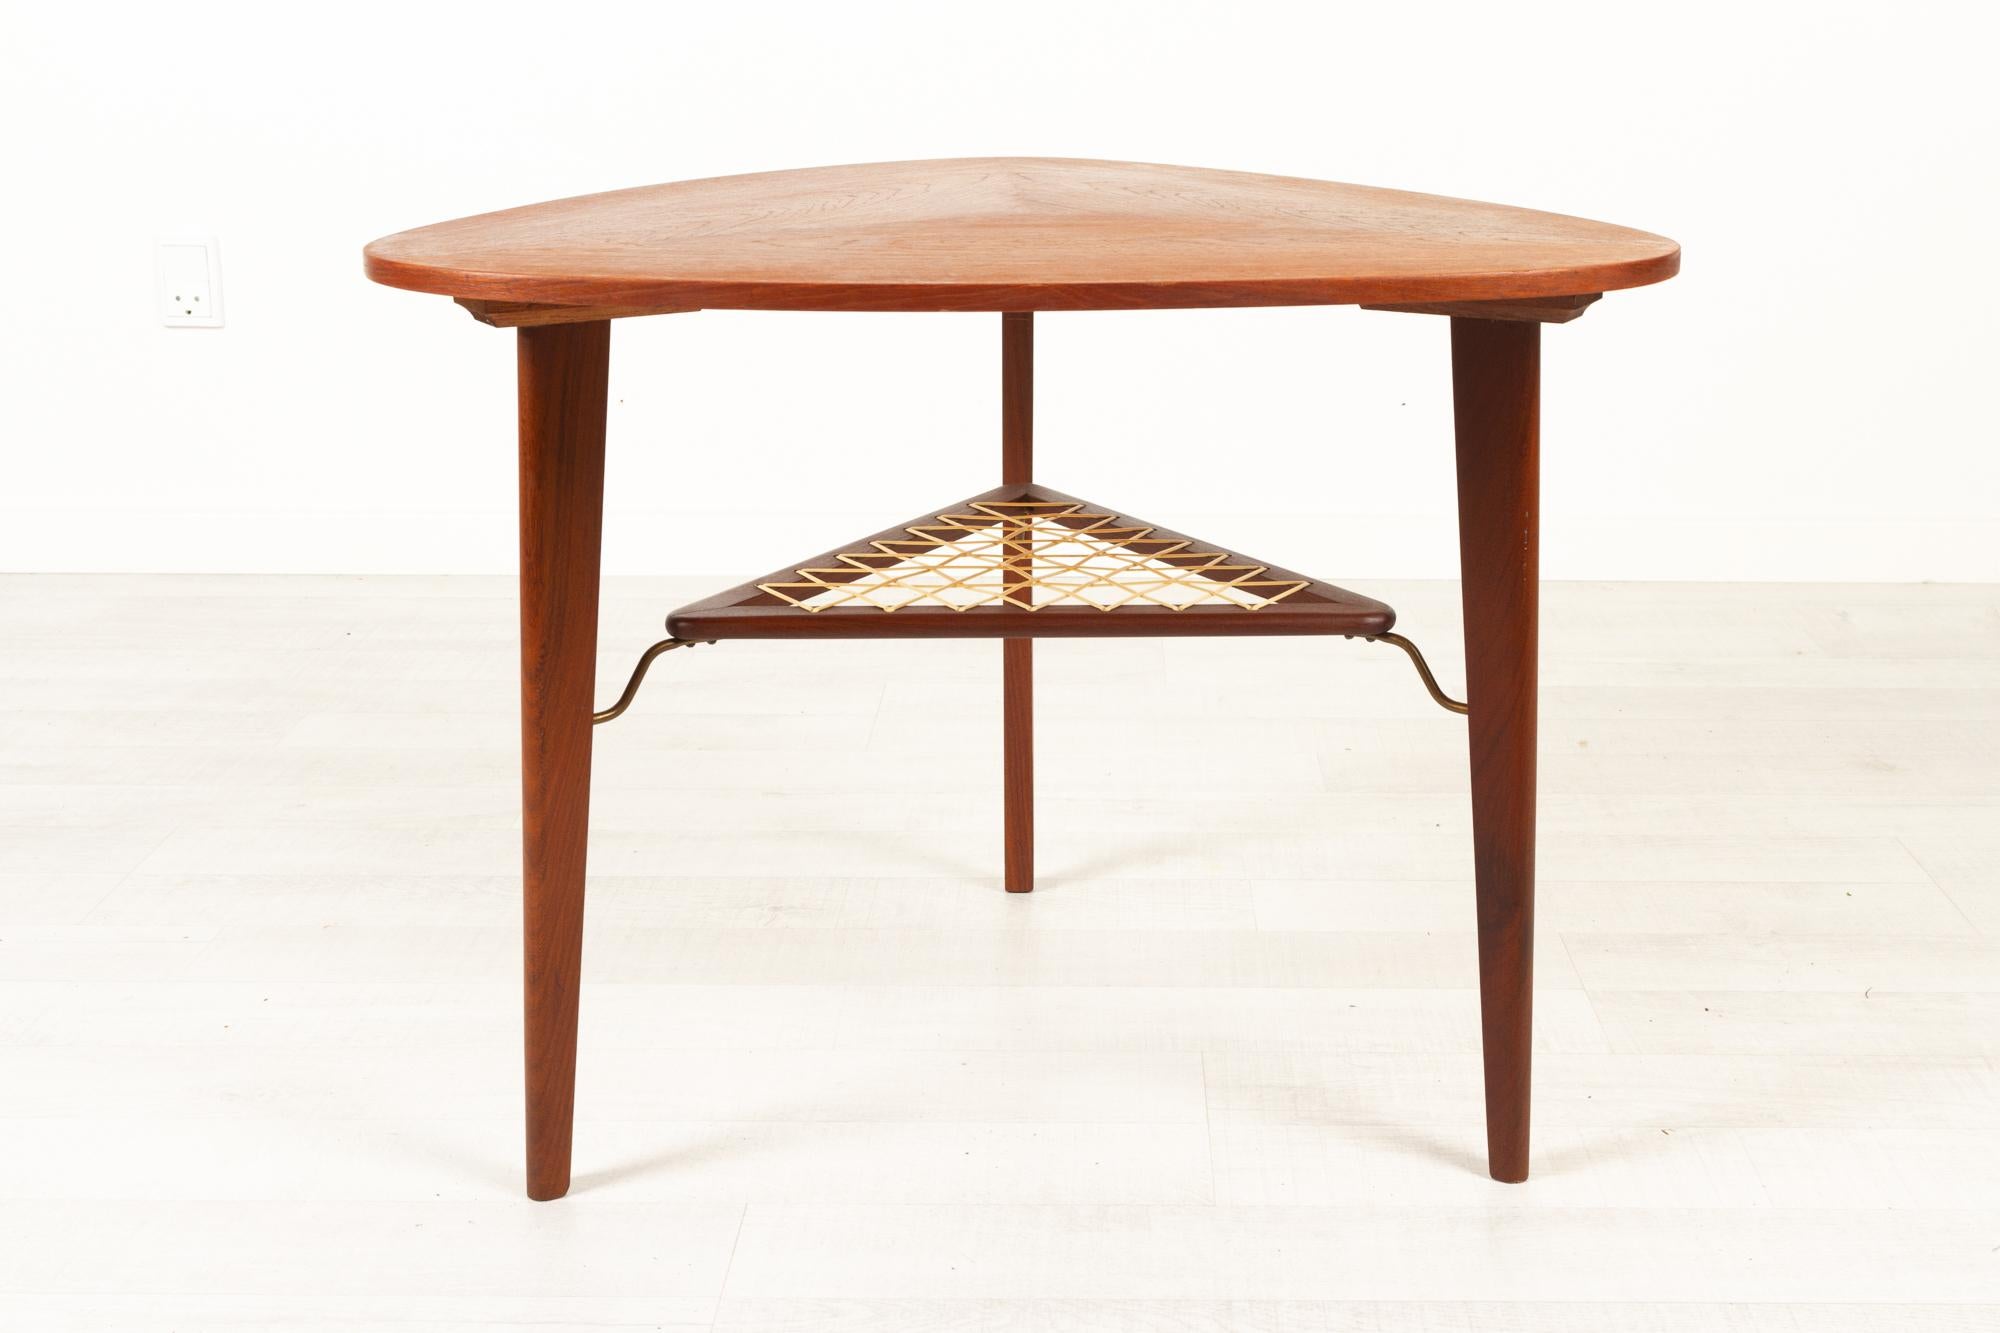 Vintage Danish teak side table 1960s
Triangular Danish Mid-Century Modern side or coffee table in teak with shelf attributed to Georg Jensen for Kubus Møbler. Elegant design with three round tapered legs. Triangular table top with rounded corners